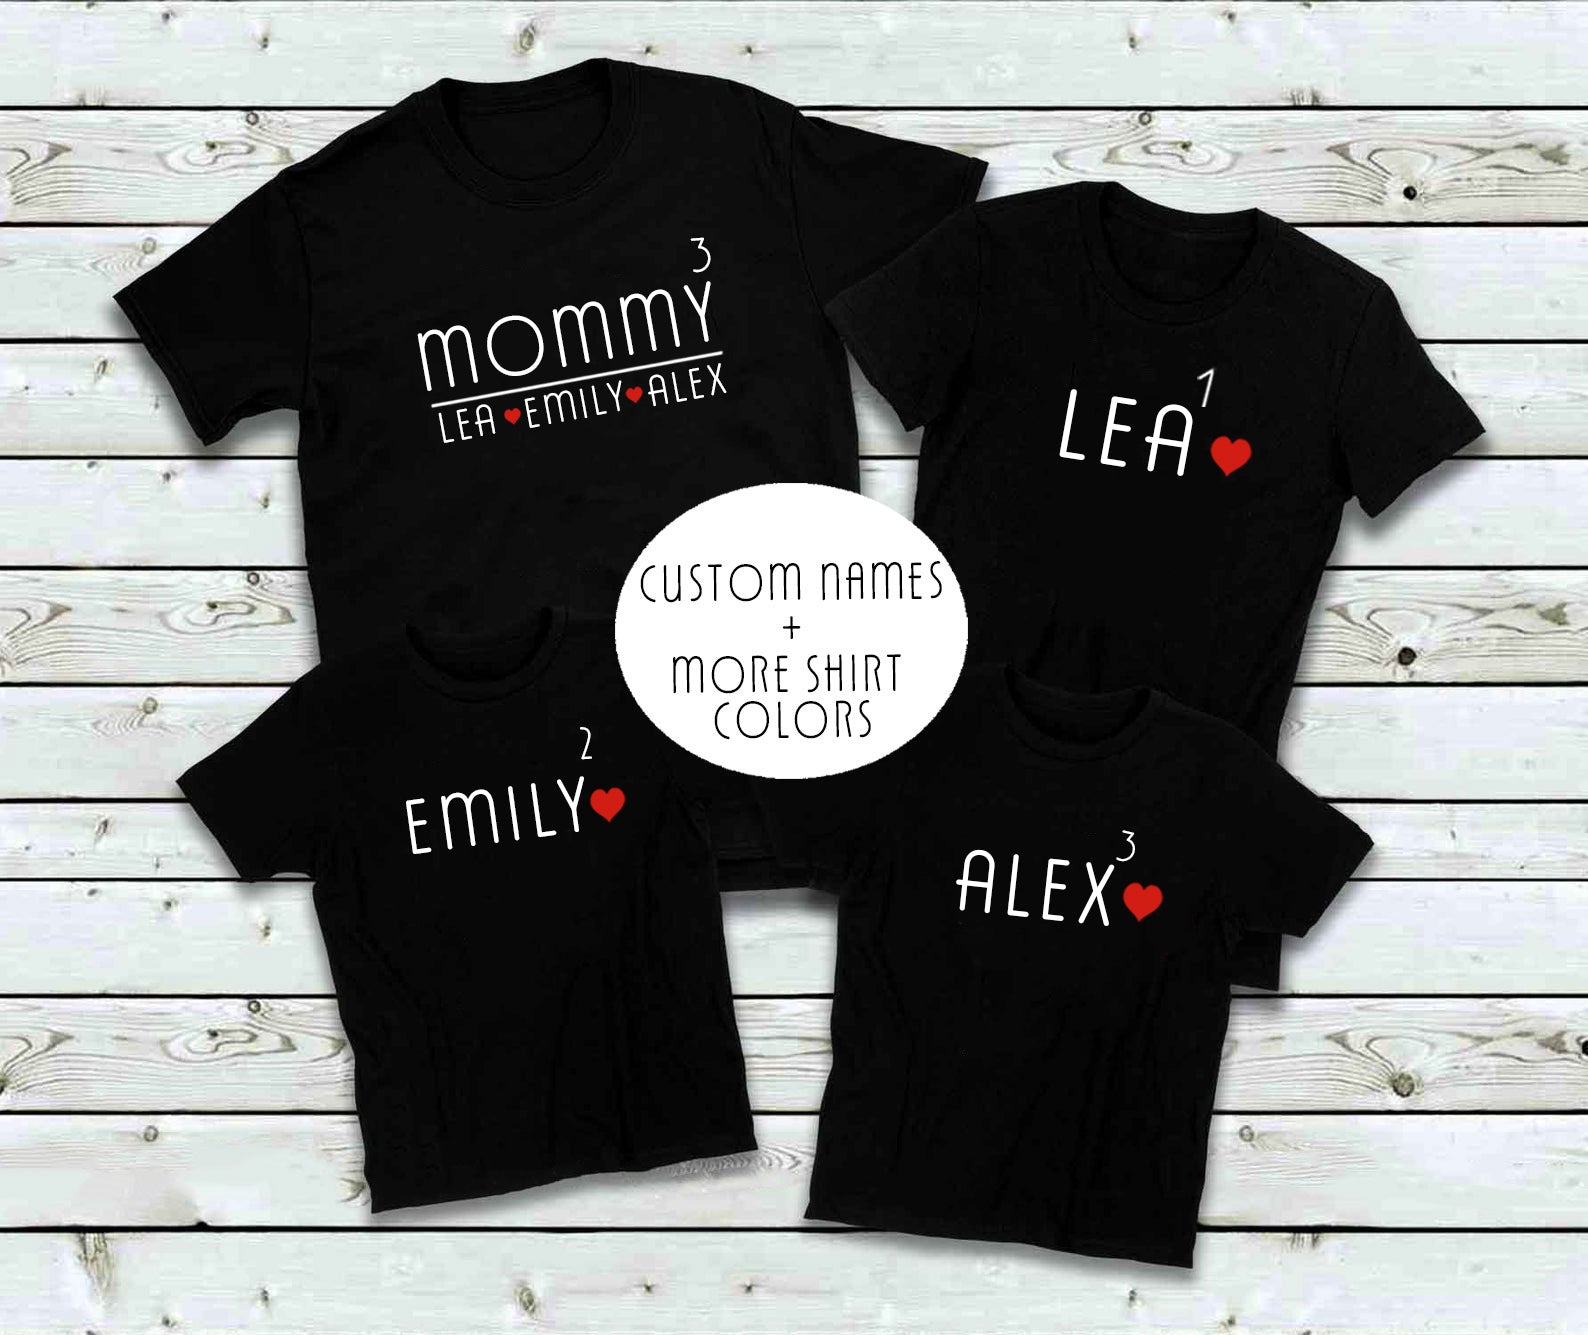 Customizable Mother's Day T-shirt MOMMY Custom Kids Name Shirt T-shirt Gift for Mom CHANGE NAMES Best Mothers Day Tshirt